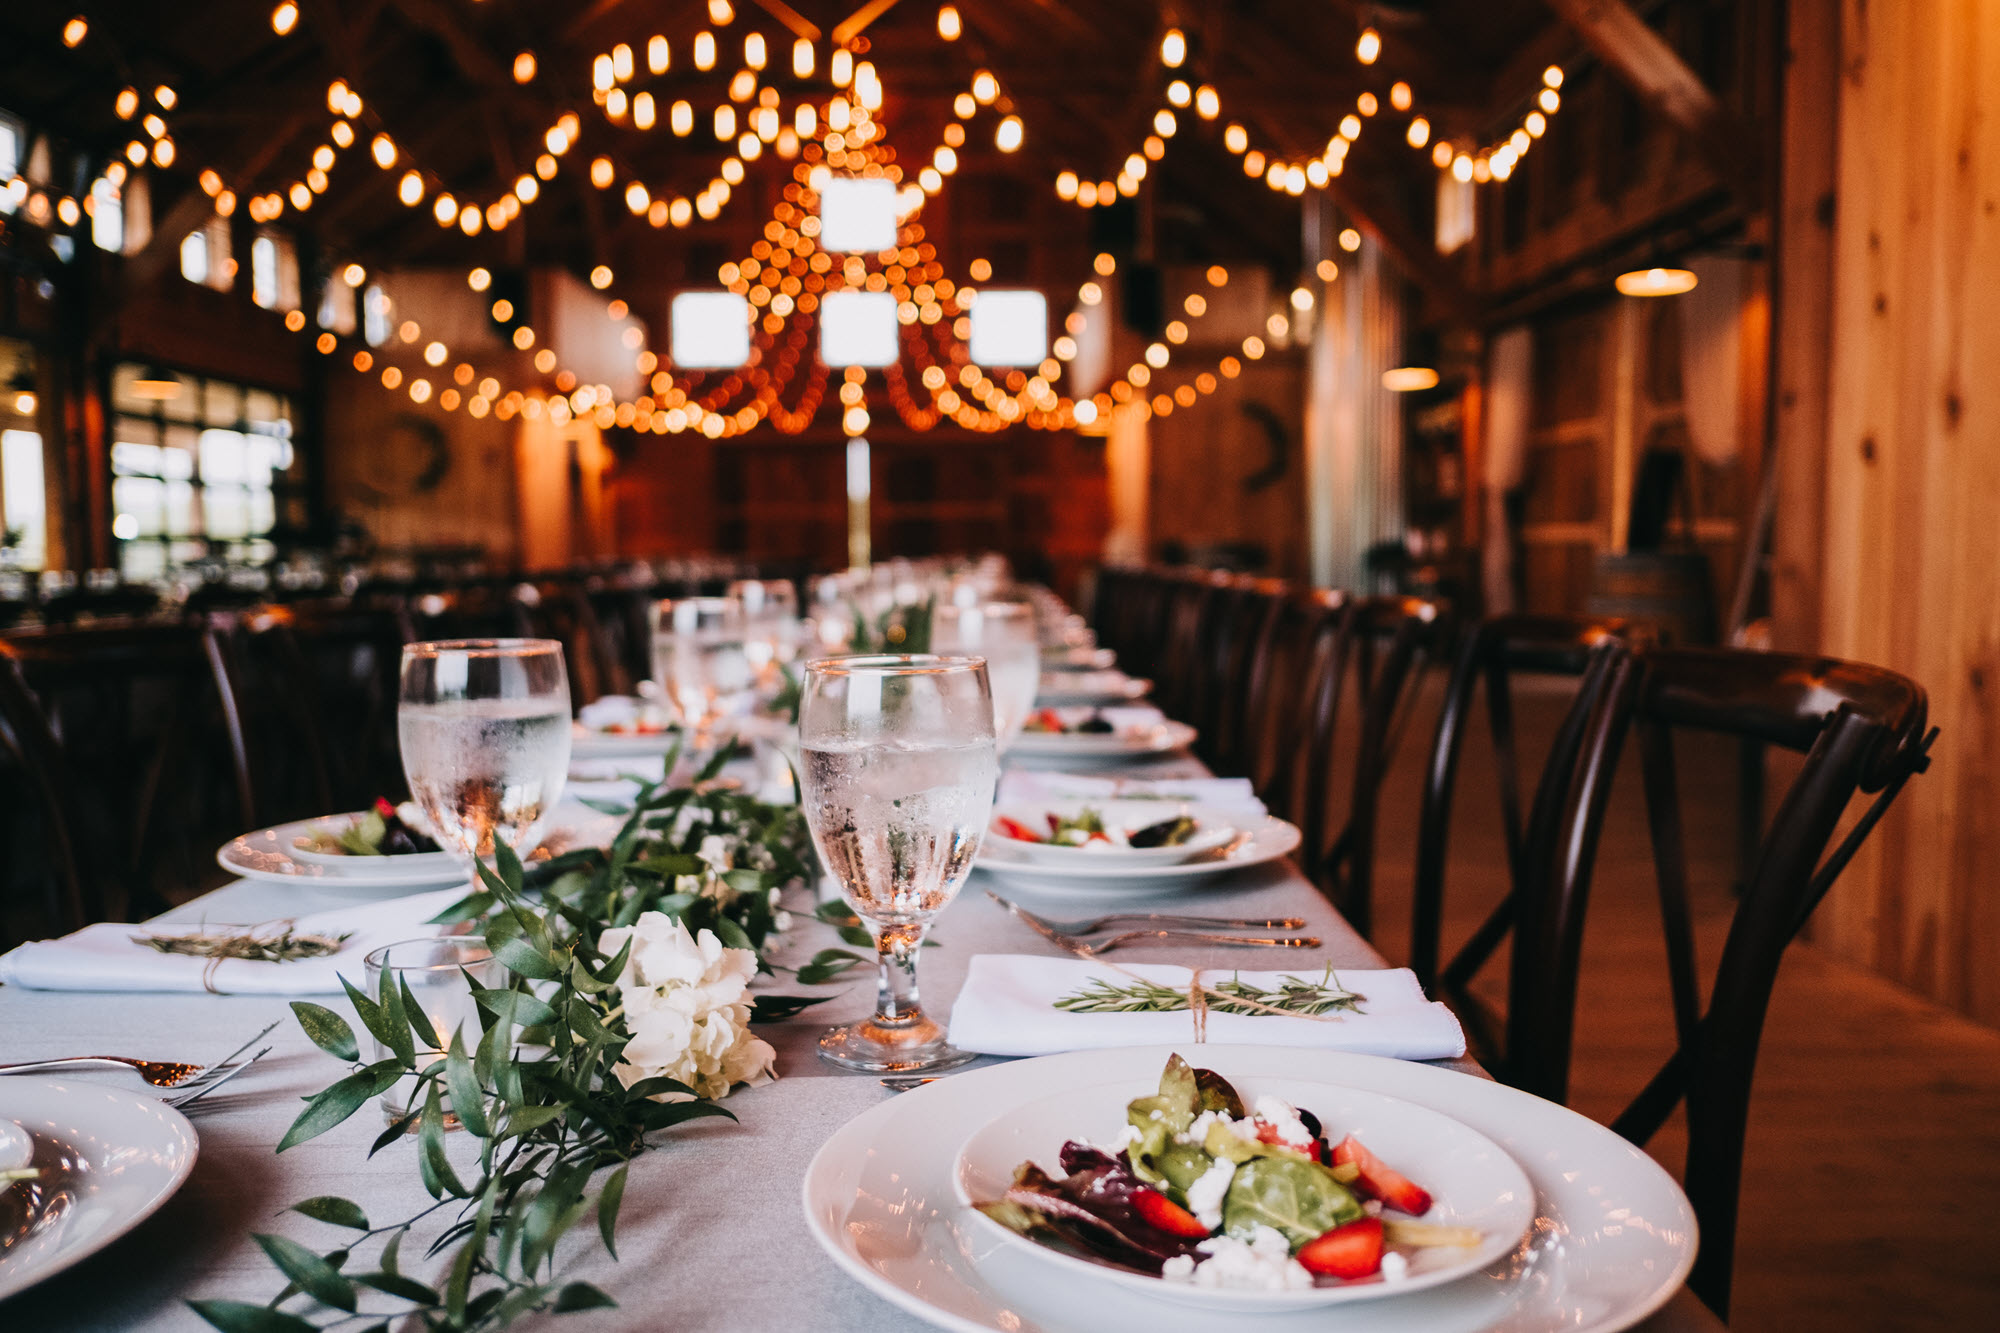 Charming Wedding Venue: Sophisticated Plated Dining and Beautifully Decorated Table Settings